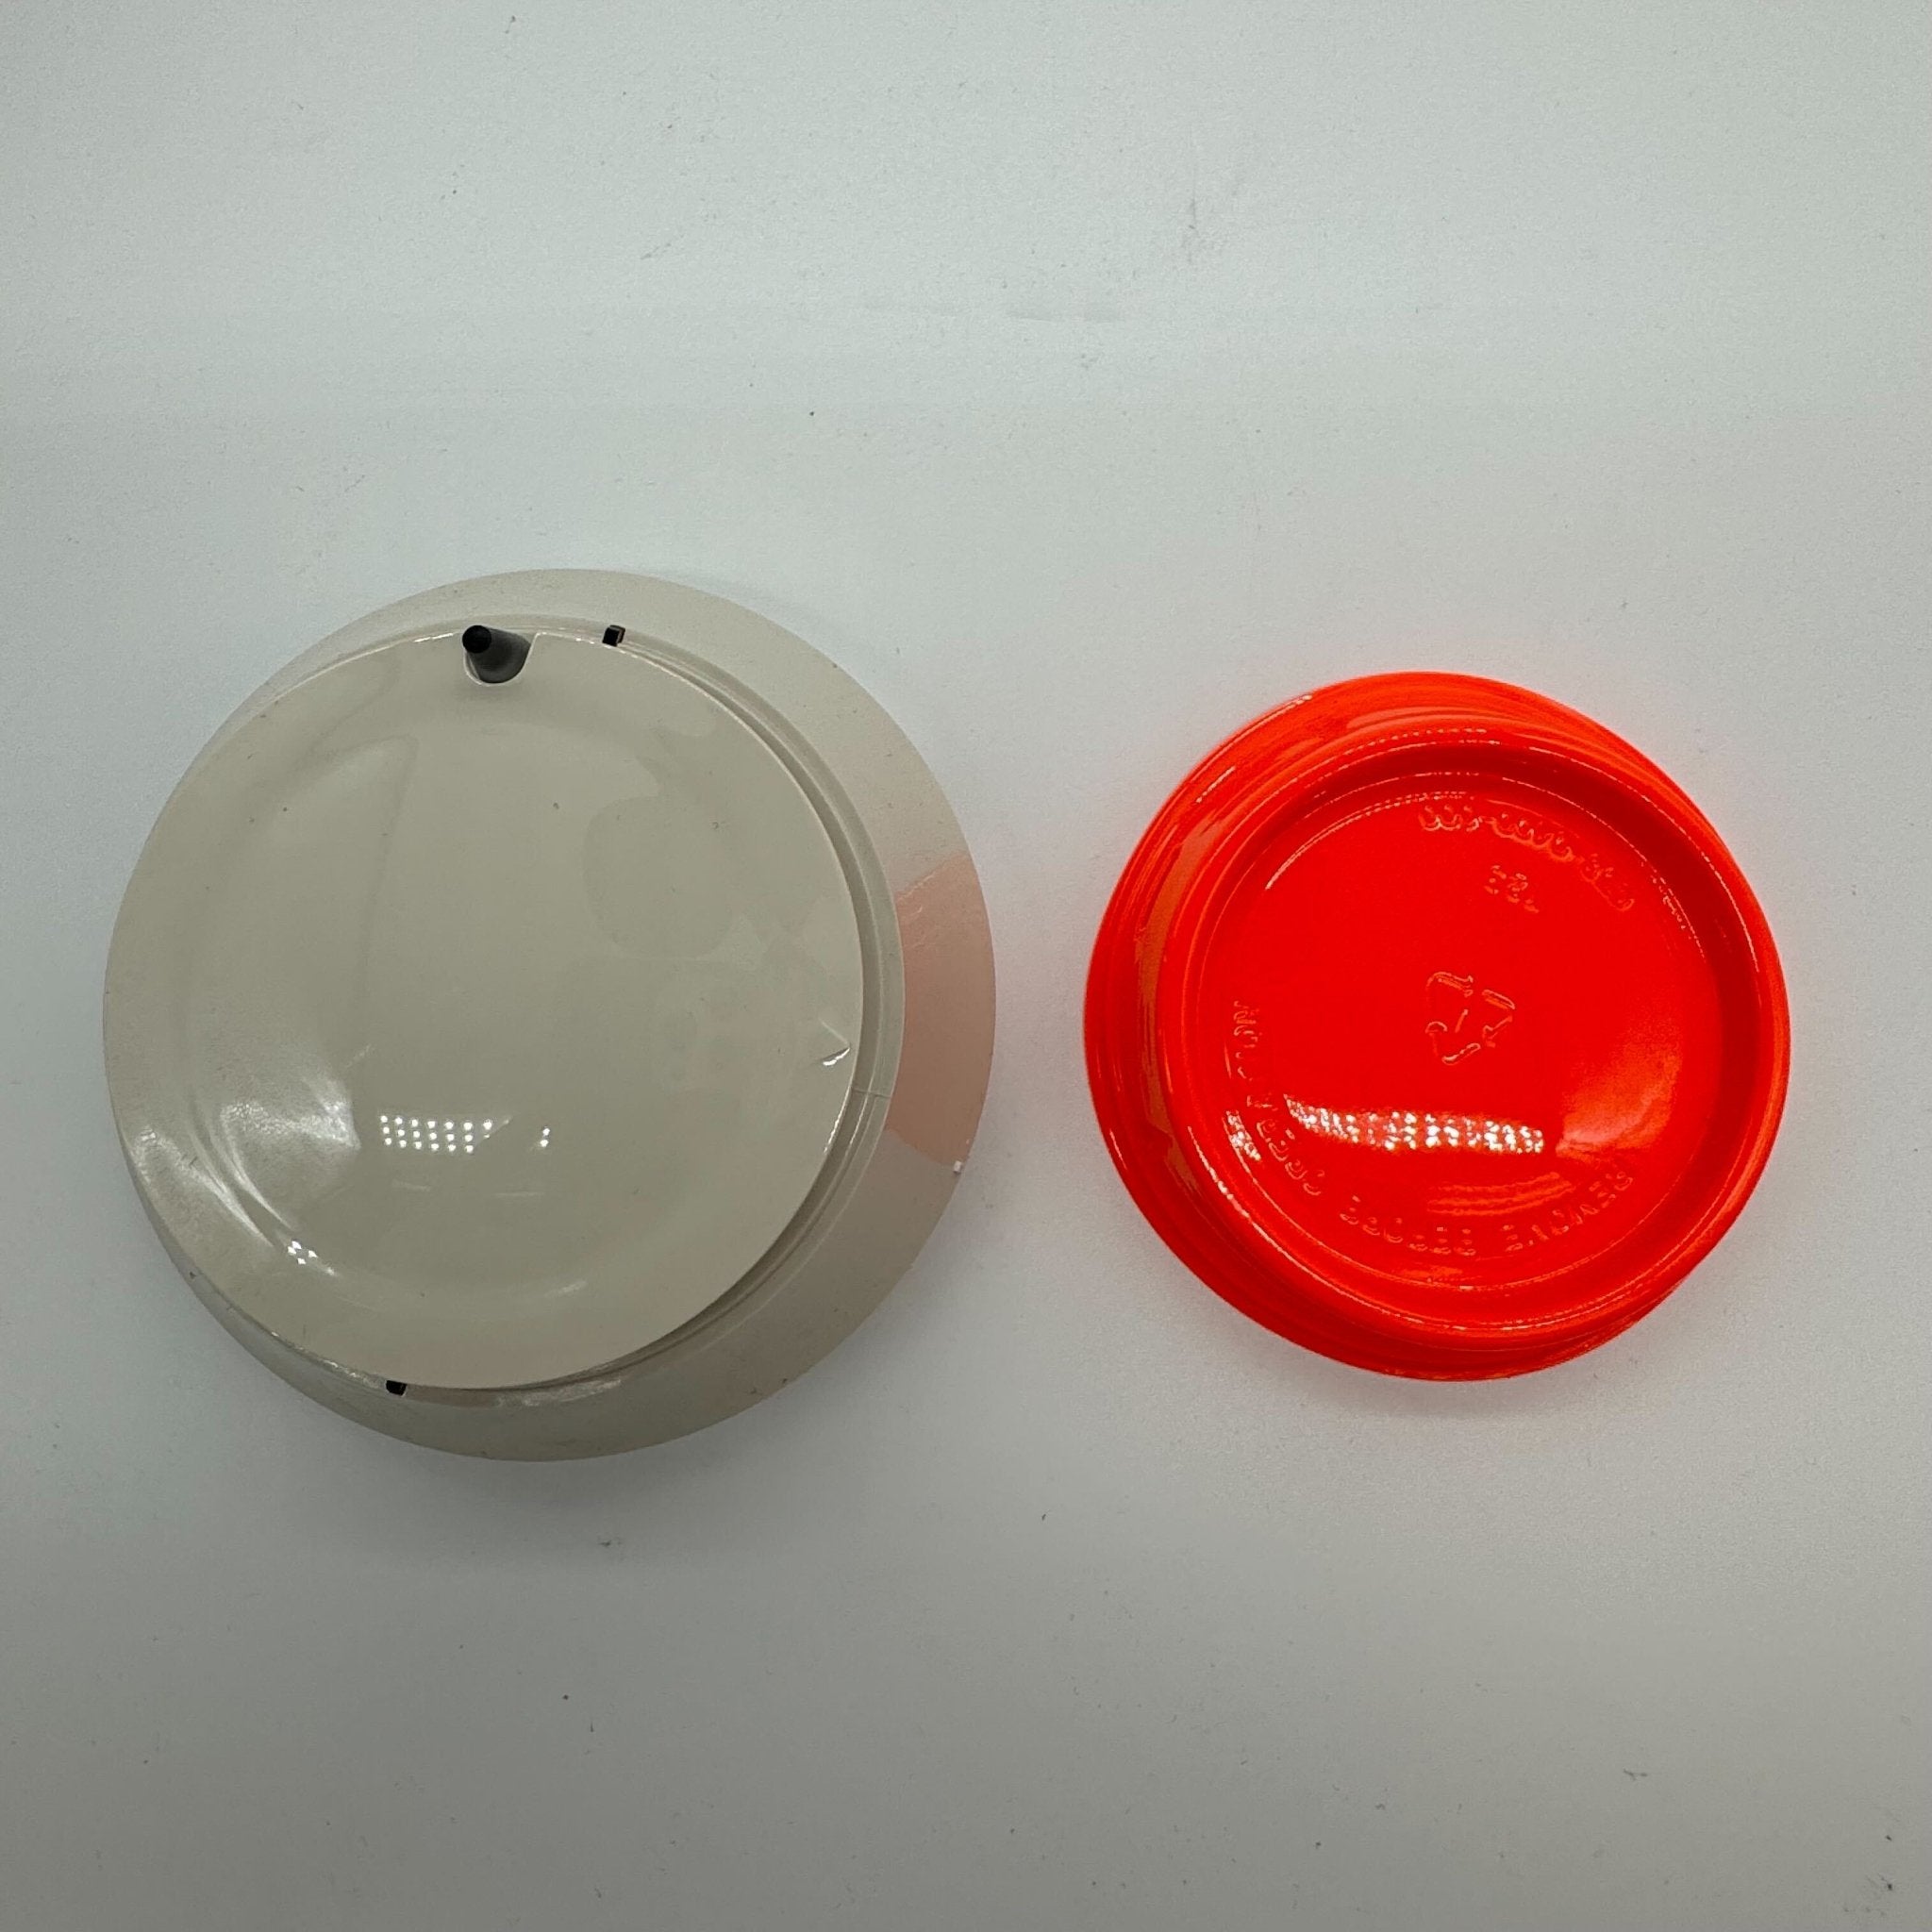 Notifier FCO-951-IV (Replaces FSC-851) - The Fire Alarm Supplier